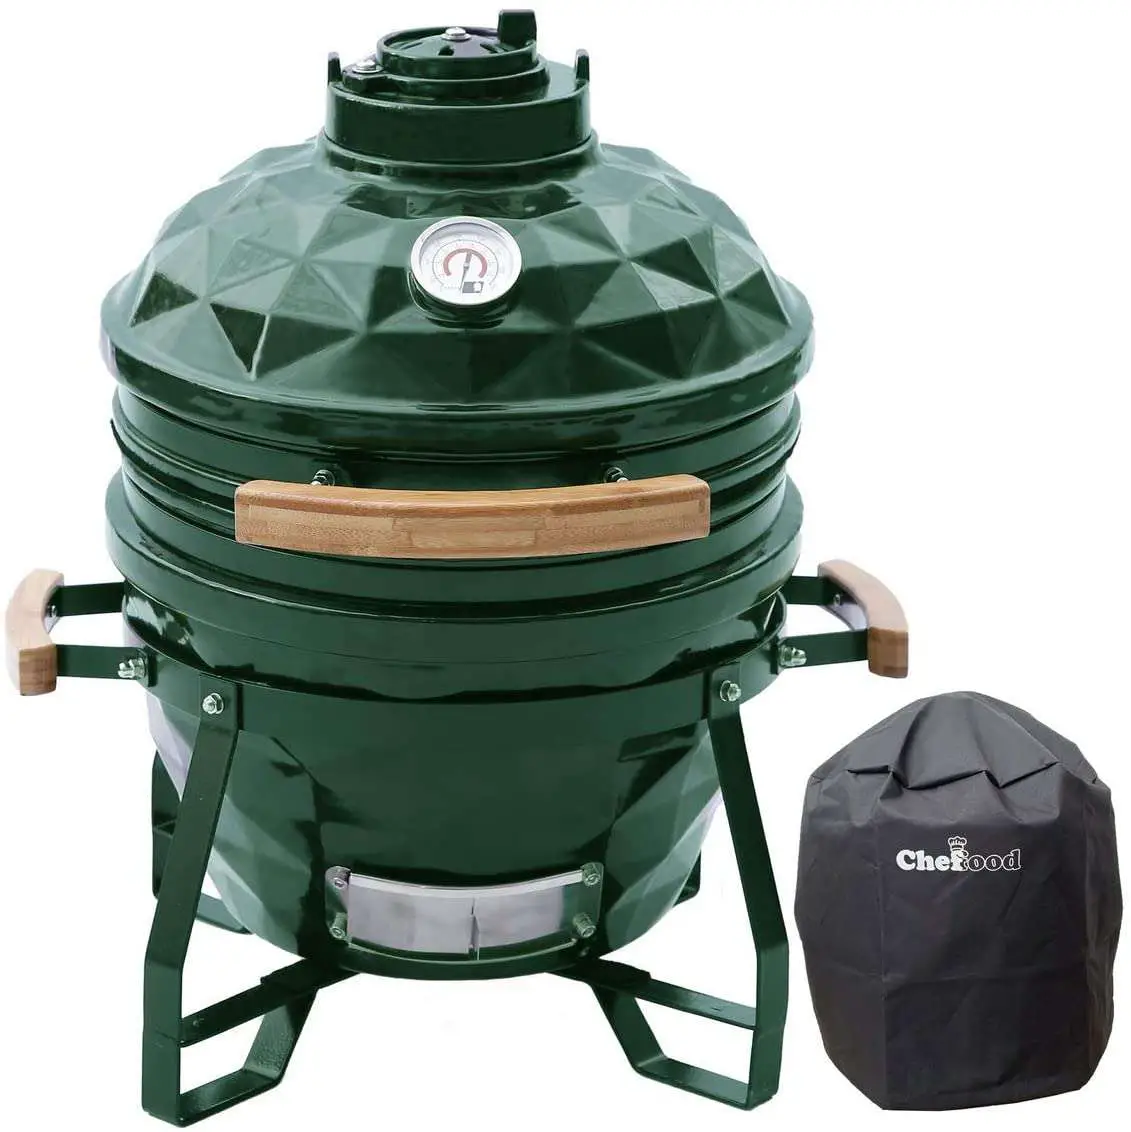 Top 6 Best Kamado Grill Reviews You Can Buy This 2020 ...